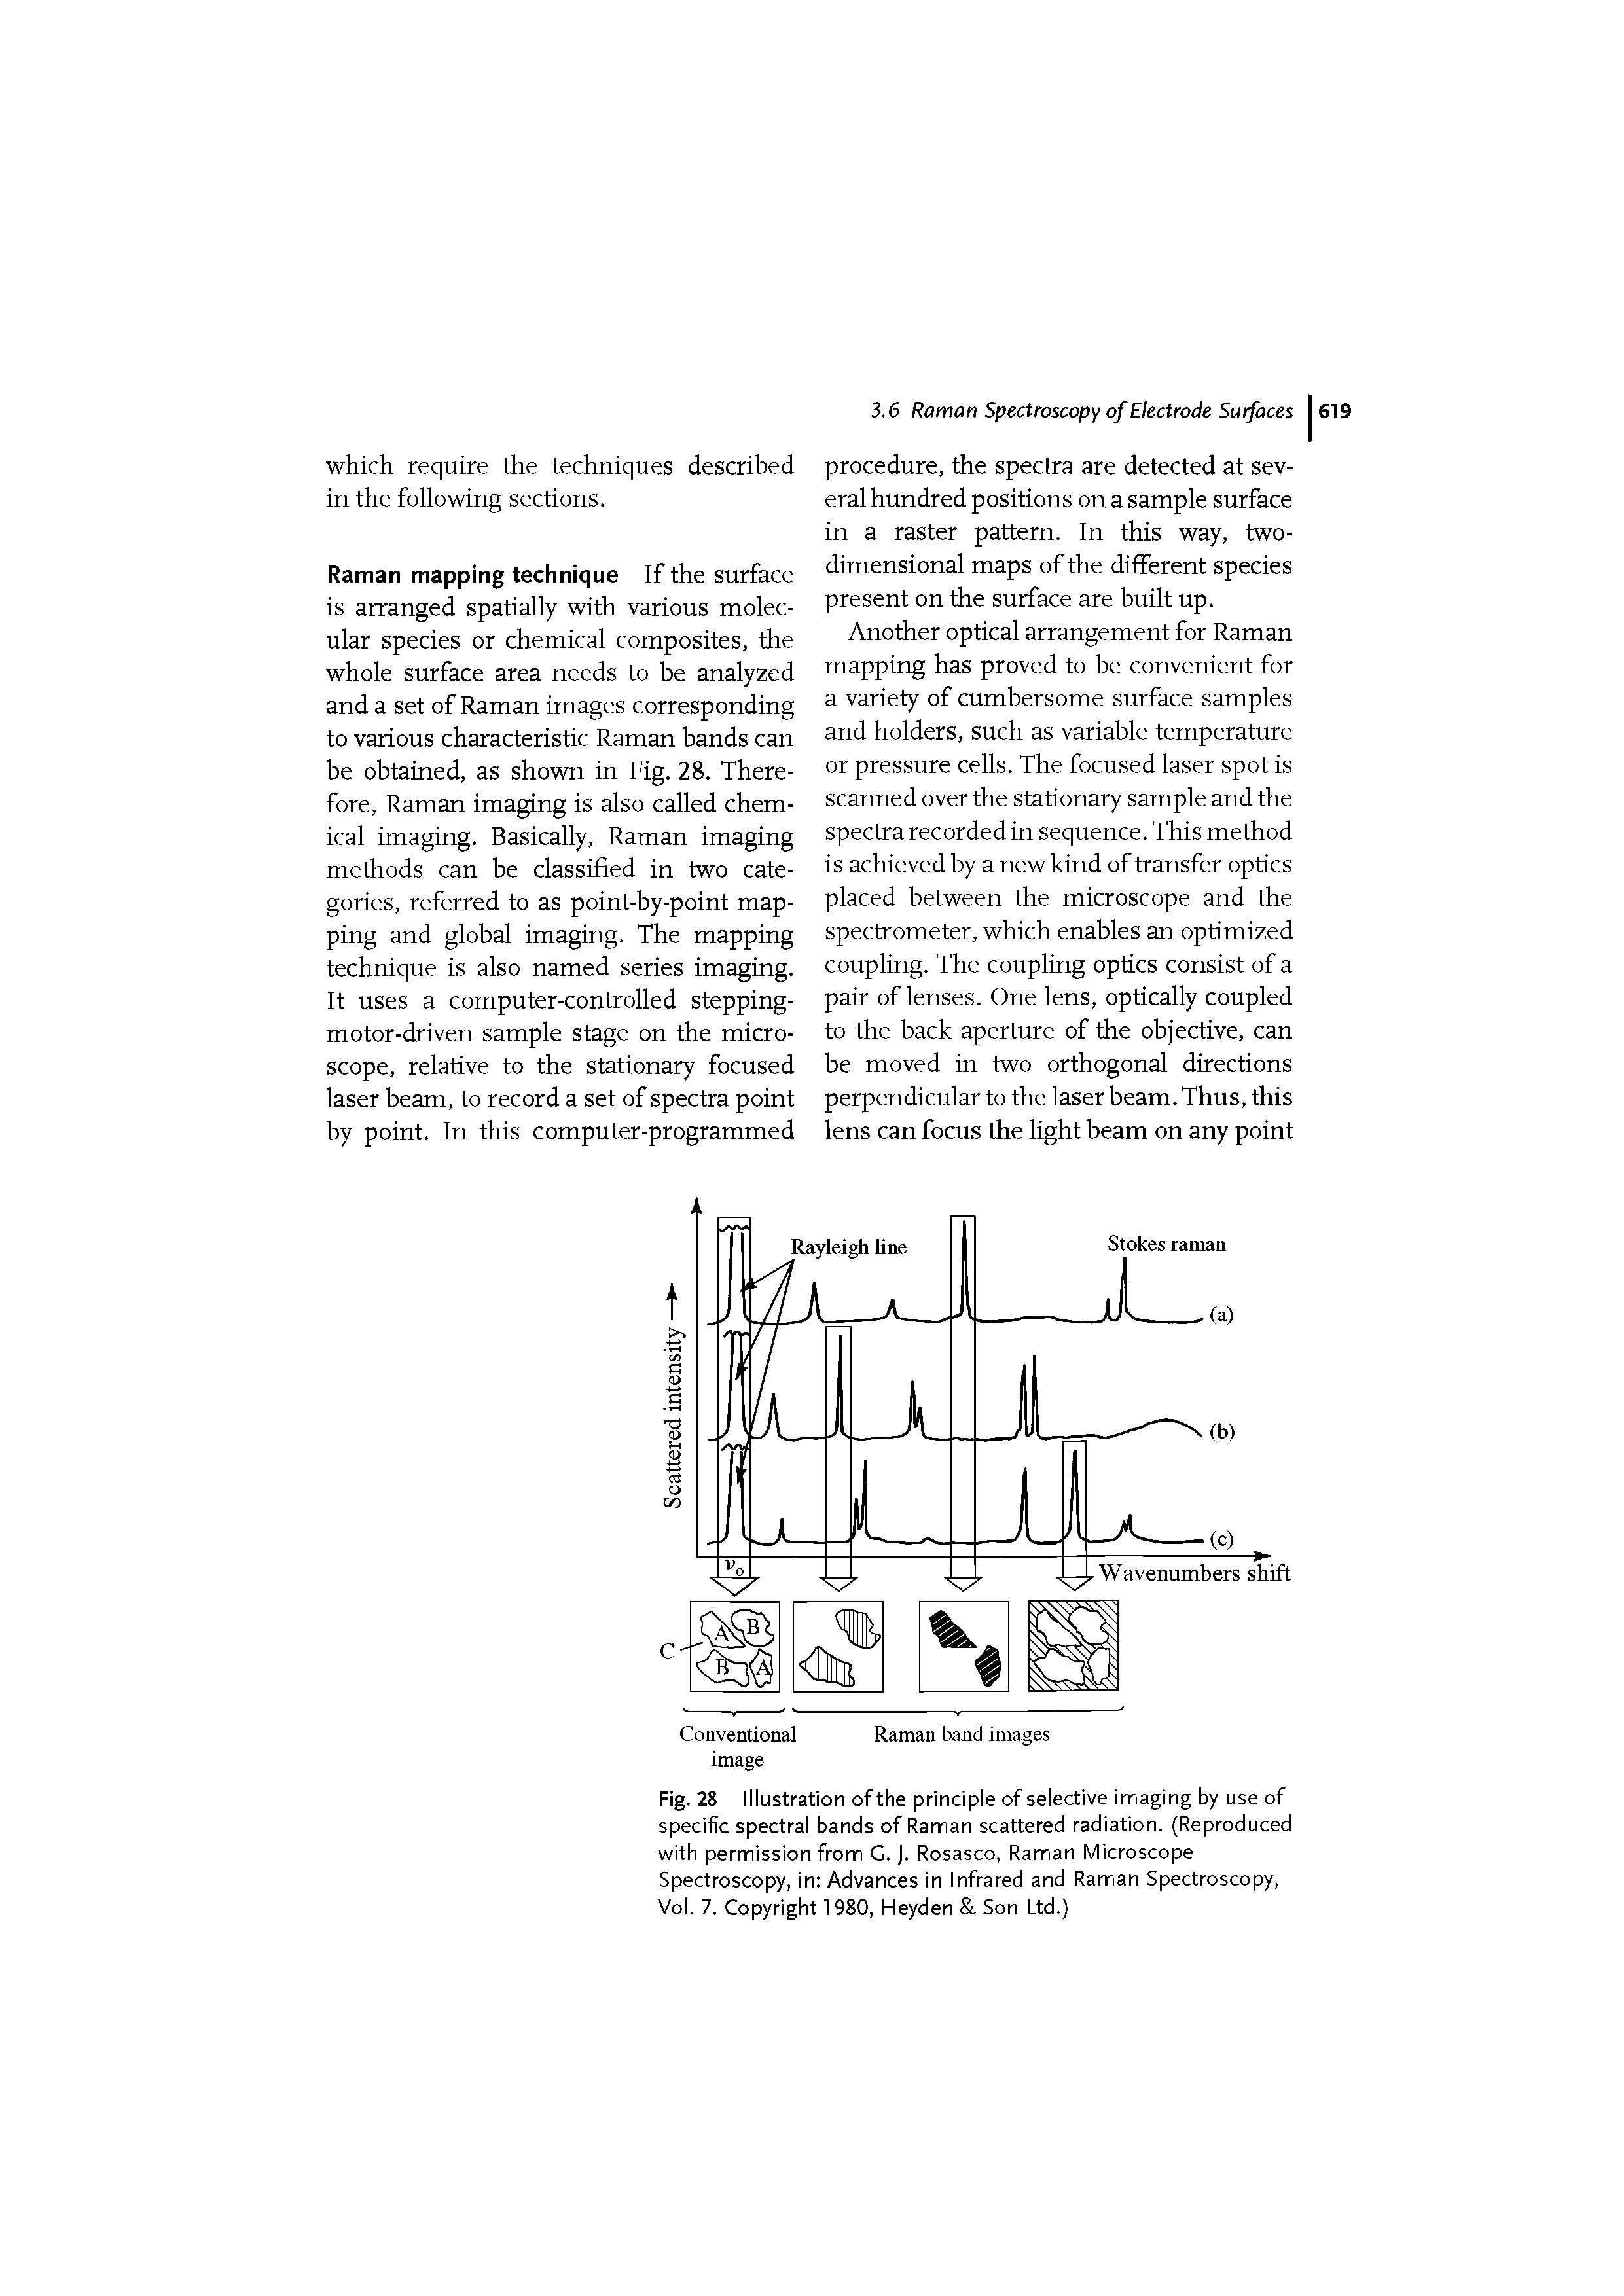 Fig. 28 Illustration of the principle of selective imaging by use of specific spectral bands of Raman scattered radiation. (Reproduced with permission from G. J. Rosasco, Raman Microscope Spectroscopy, in Advances in infrared and Raman Spectroscopy, Vol. 7. Copyright 1980, Heyden Son Ltd.)...